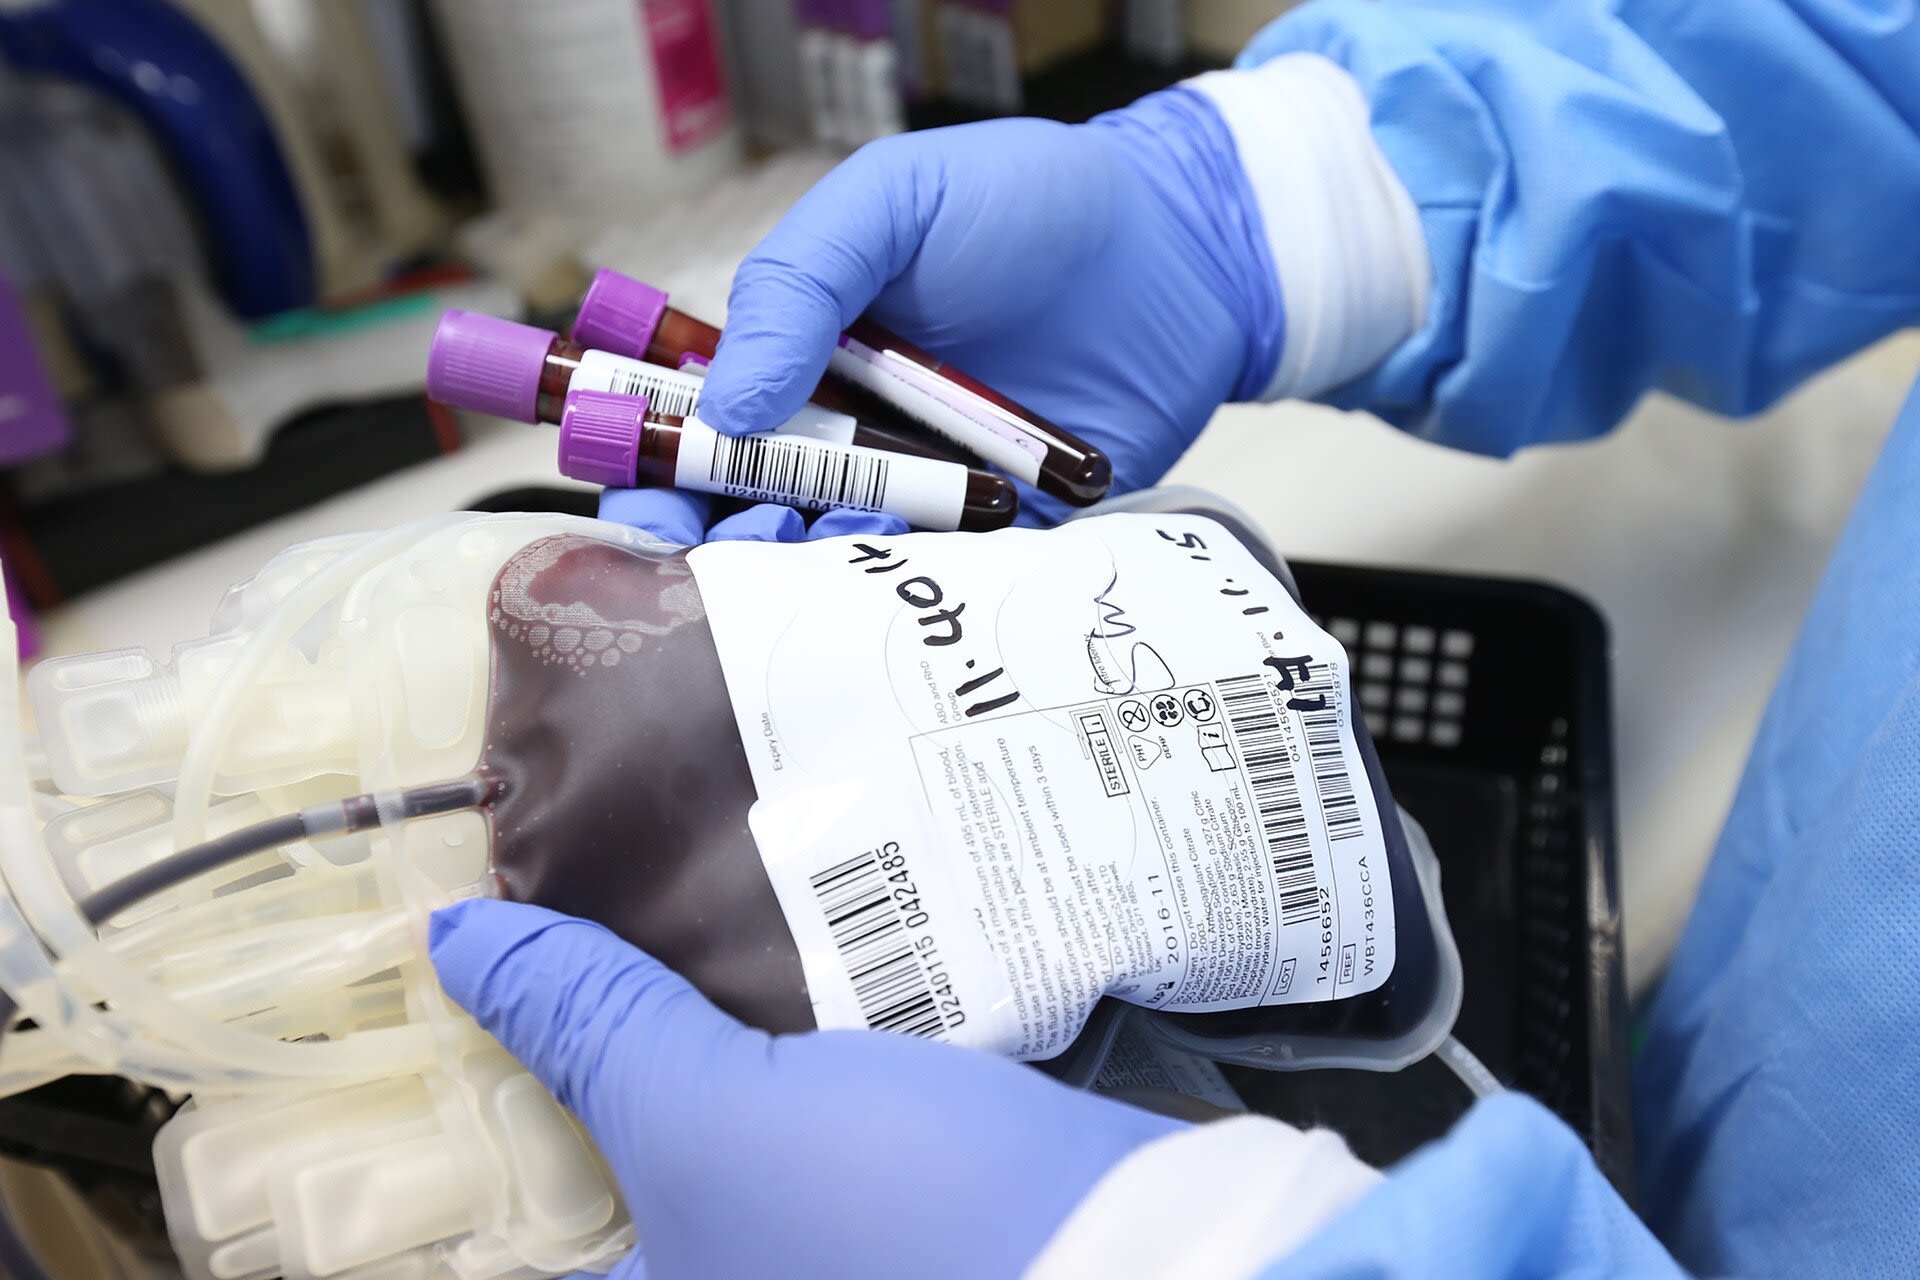 Examining whether administering blood transfusions before hospital arrival improves trauma patients' survival